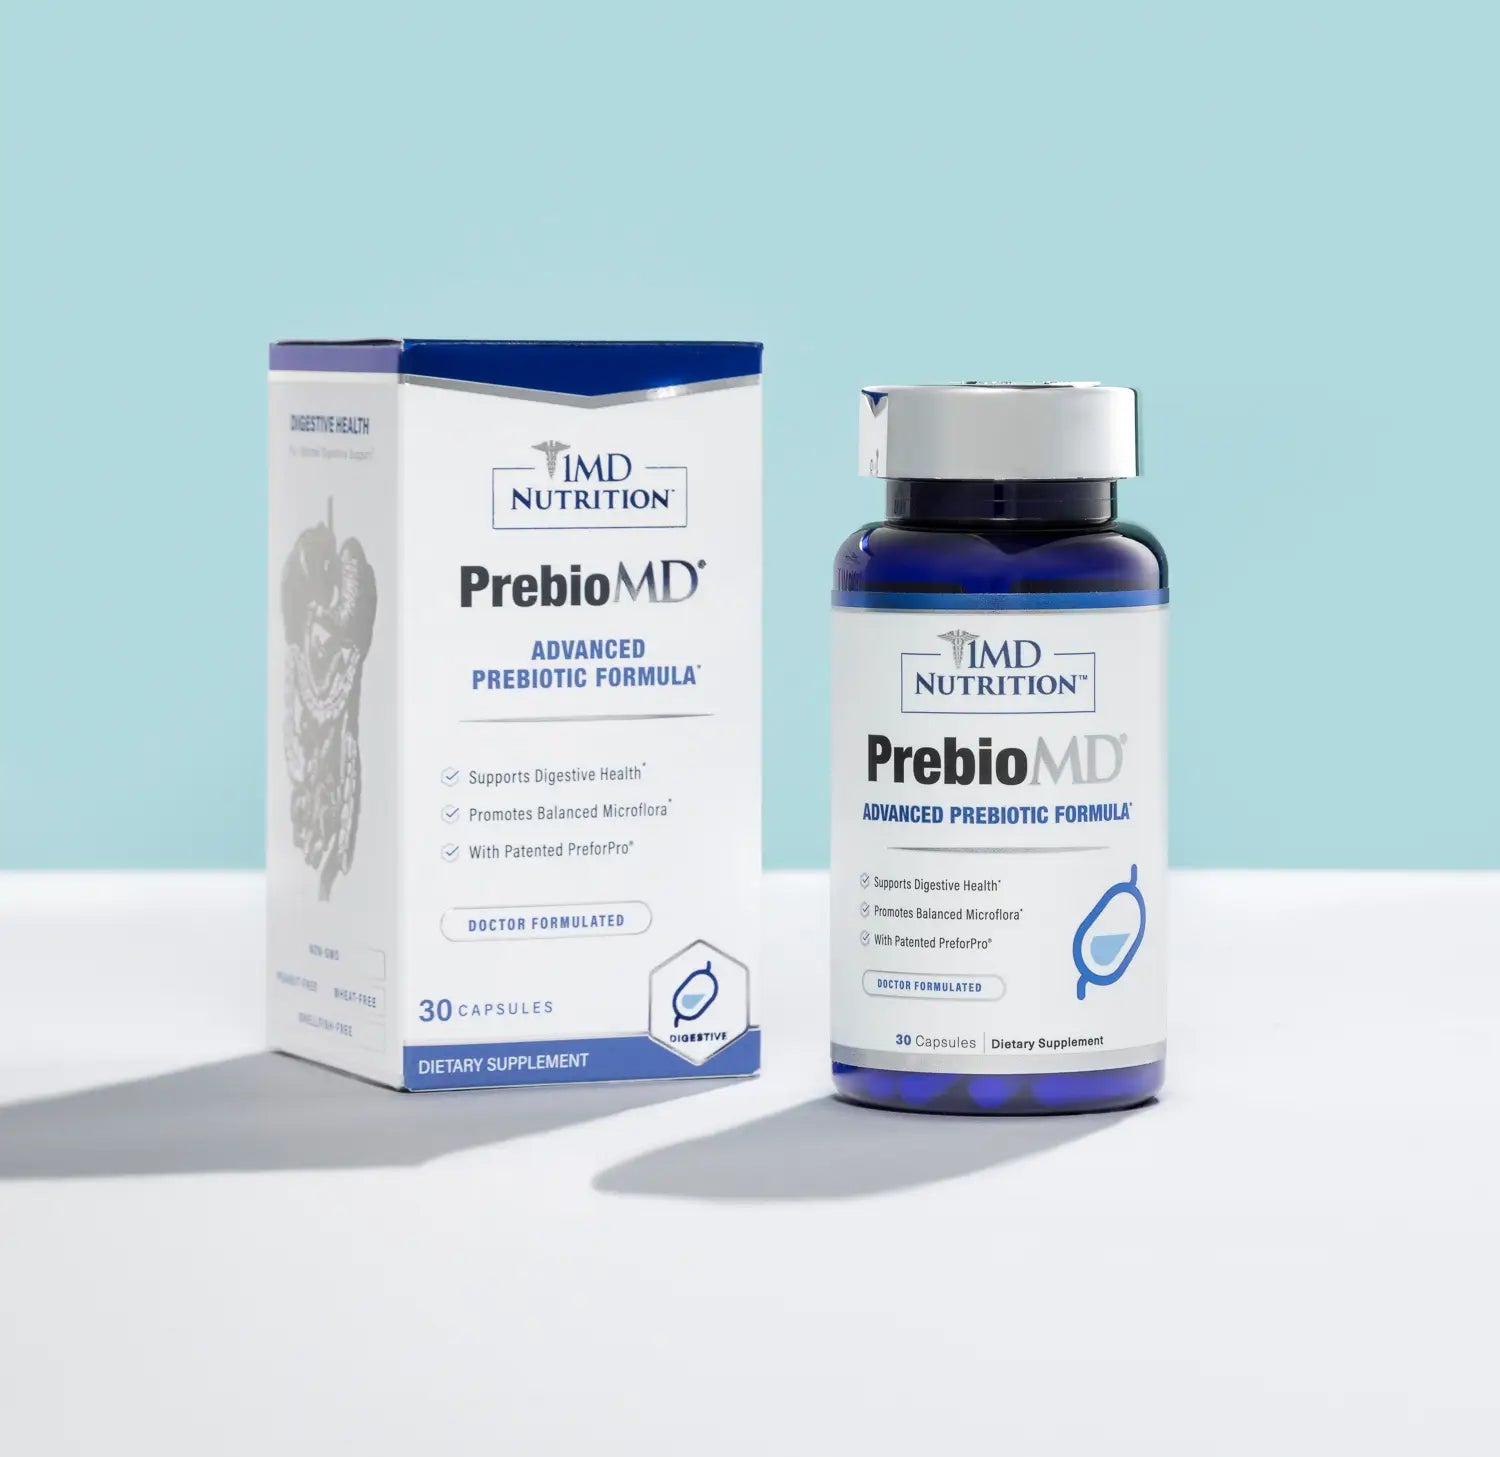 1MD Nutrition PrebioMD box and bottle